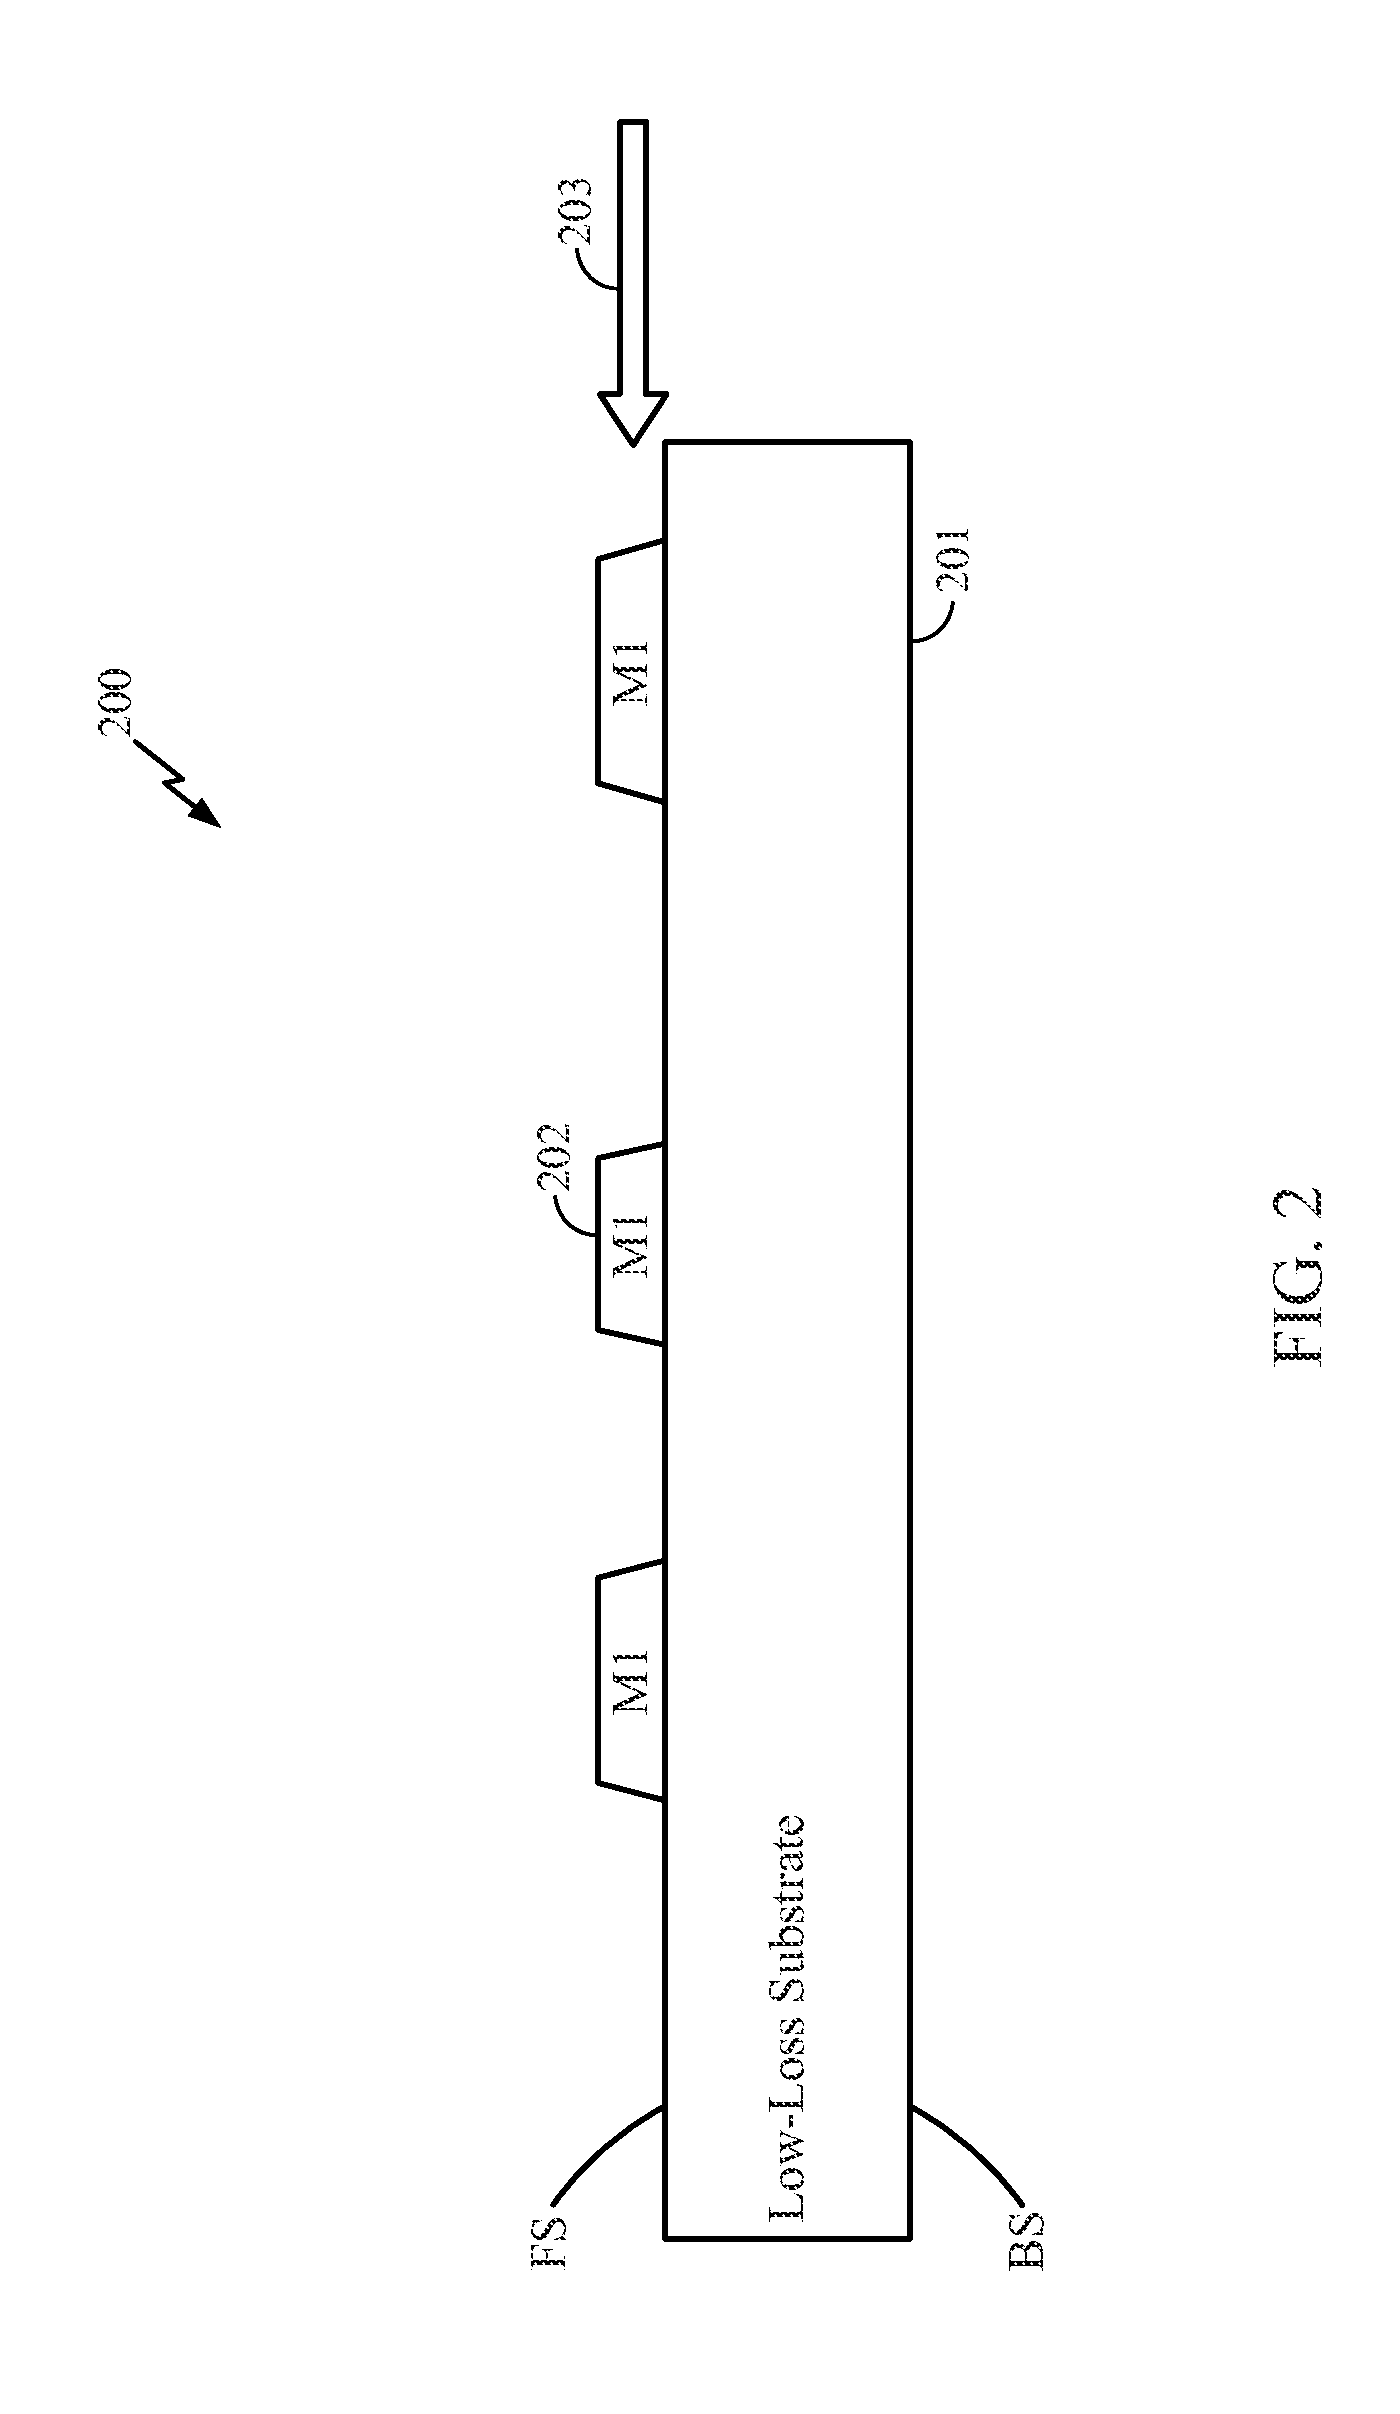 Vertical-coupling transformer with an air-gap structure